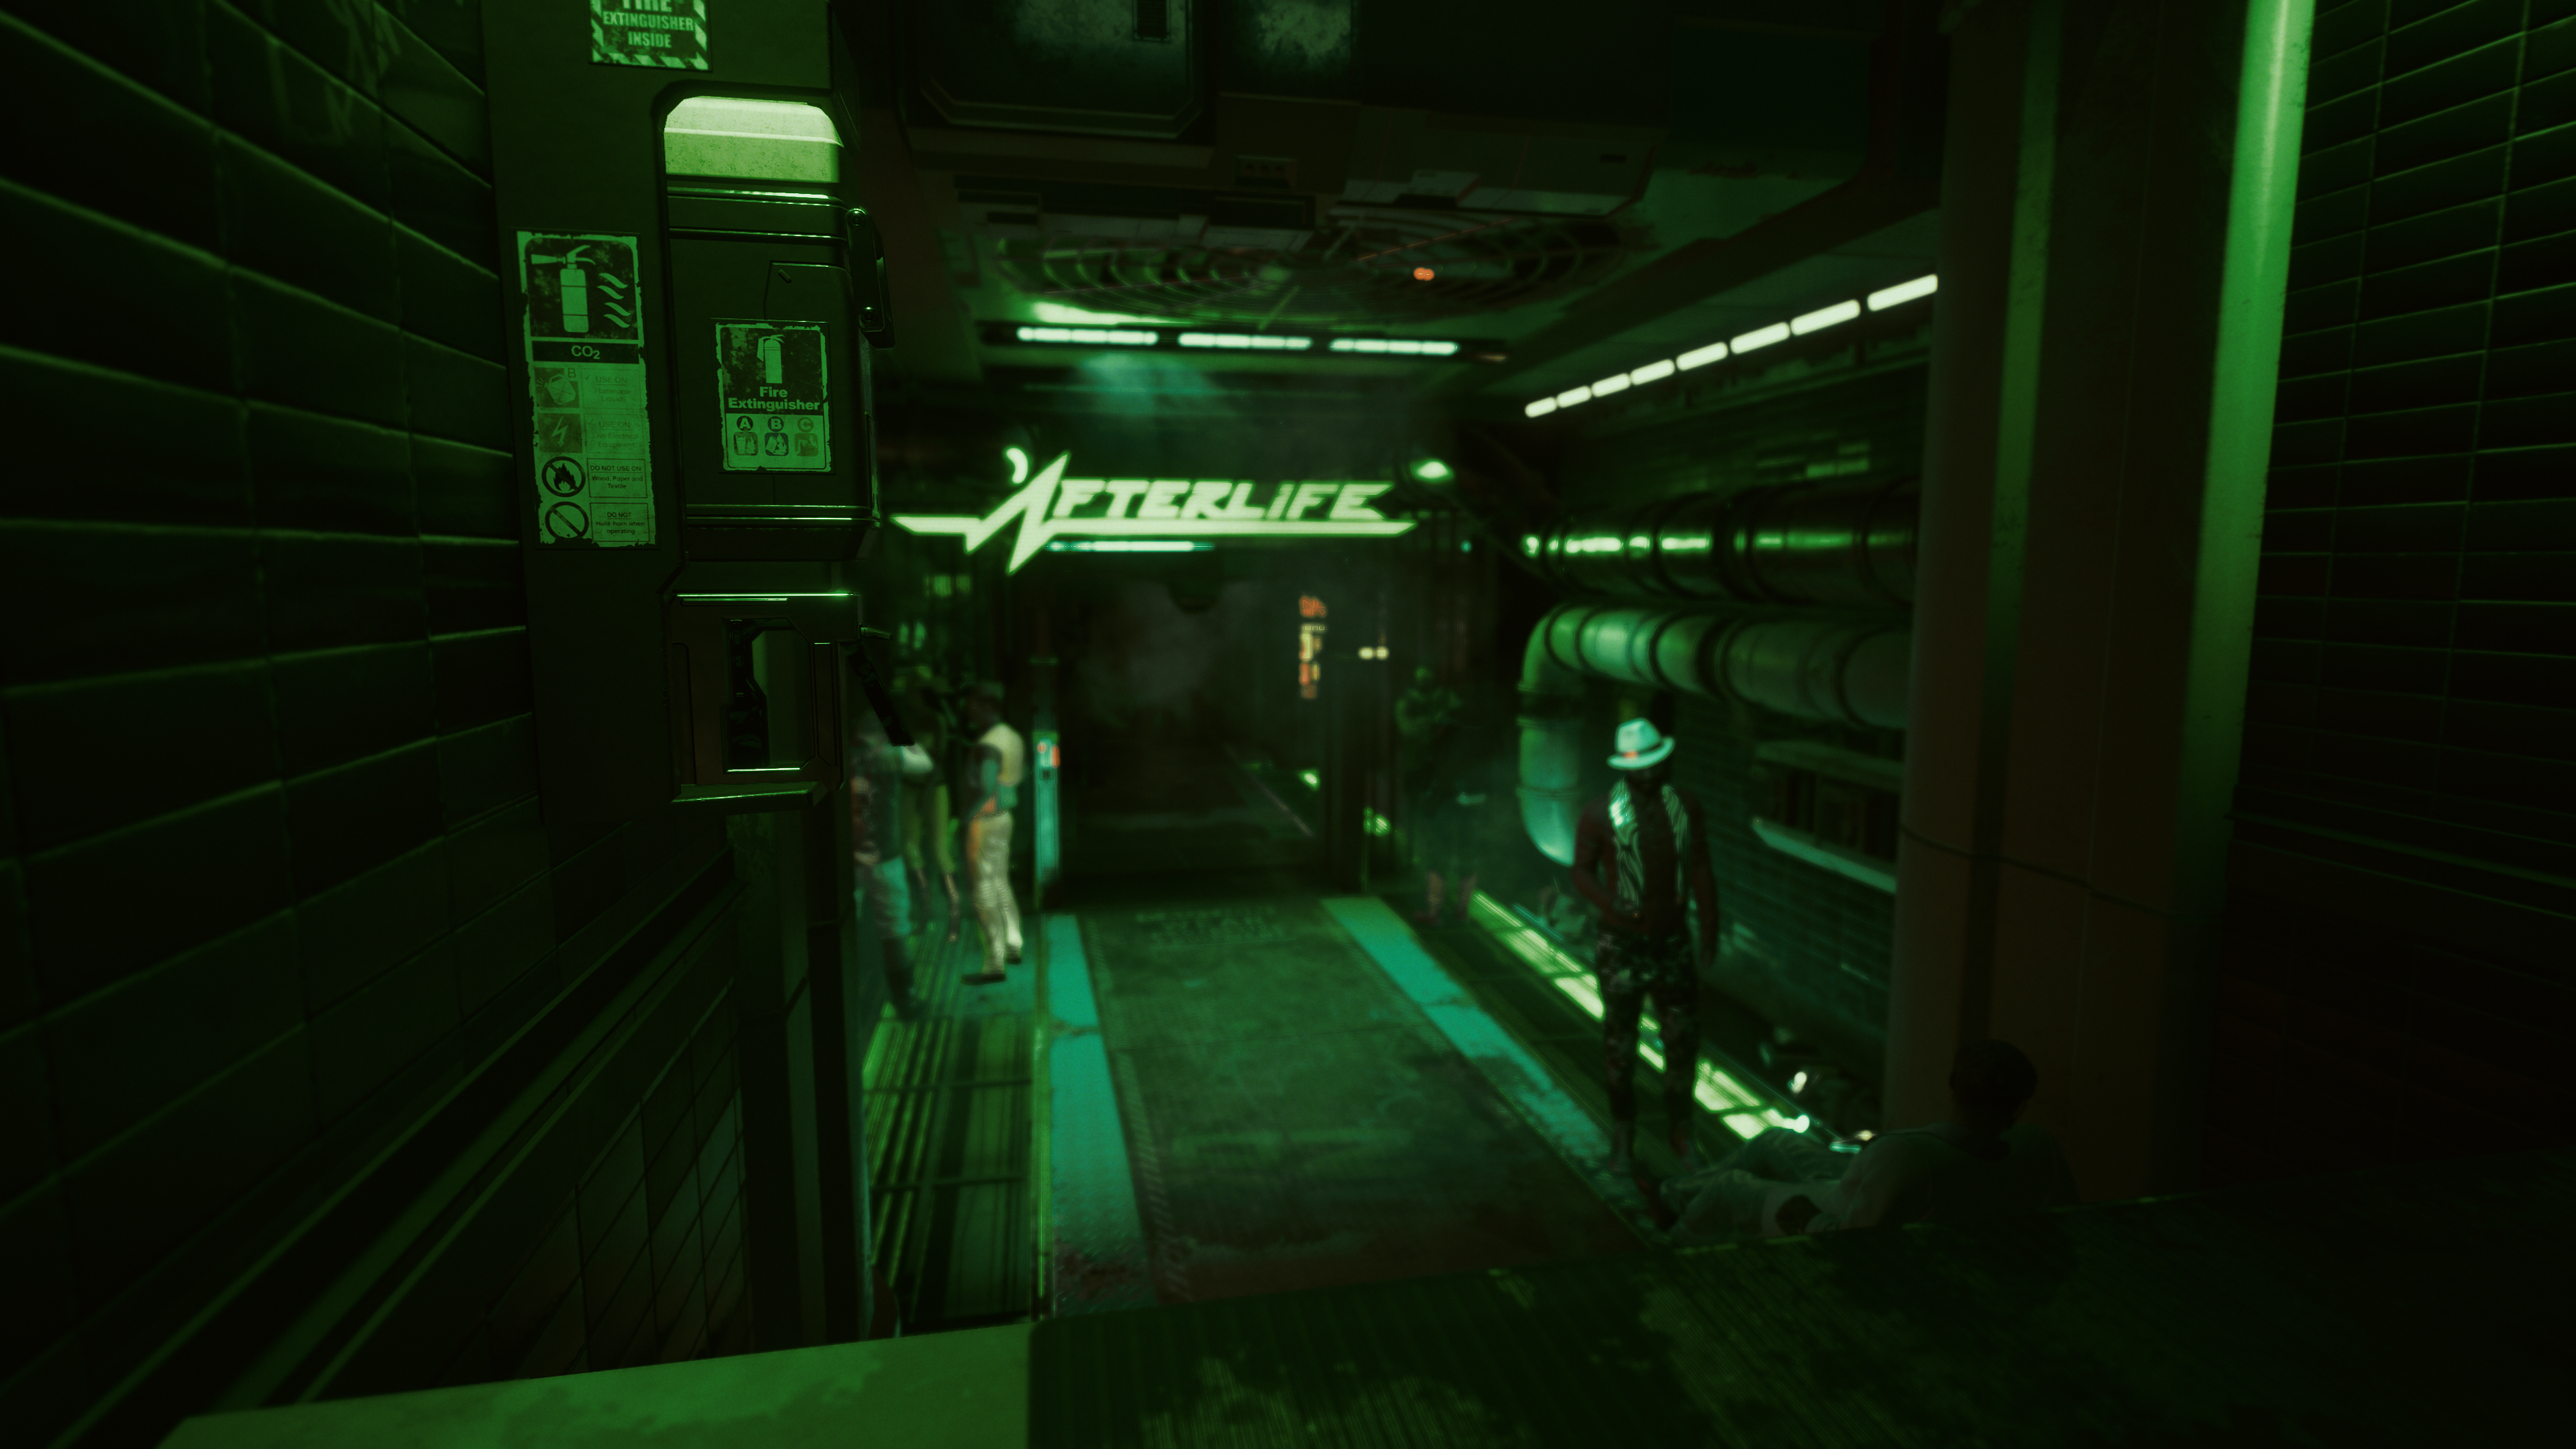 General 3840x2160 Cyberpunk 2077 video games lights neon green reflection afterlife underground street microchip cyber science fiction futuristic futuristic city people urban